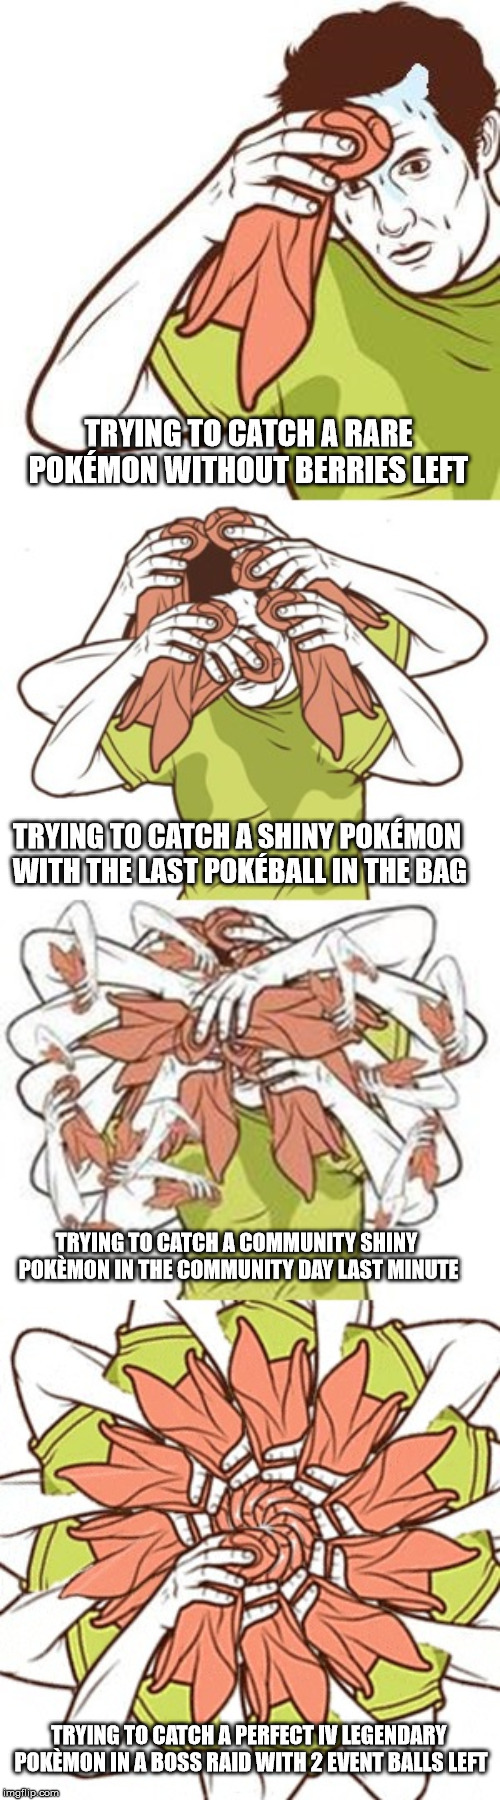 Critical moments in Pokémon GO | TRYING TO CATCH A RARE POKÉMON WITHOUT BERRIES LEFT; TRYING TO CATCH A SHINY POKÉMON WITH THE LAST POKÉBALL IN THE BAG; TRYING TO CATCH A COMMUNITY SHINY POKÈMON IN THE COMMUNITY DAY LAST MINUTE; TRYING TO CATCH A PERFECT IV LEGENDARY POKÈMON IN A BOSS RAID WITH 2 EVENT BALLS LEFT | image tagged in sweating towel guy evolution,pokemon go,pokemon go meme,pokemon,sweat,panic | made w/ Imgflip meme maker